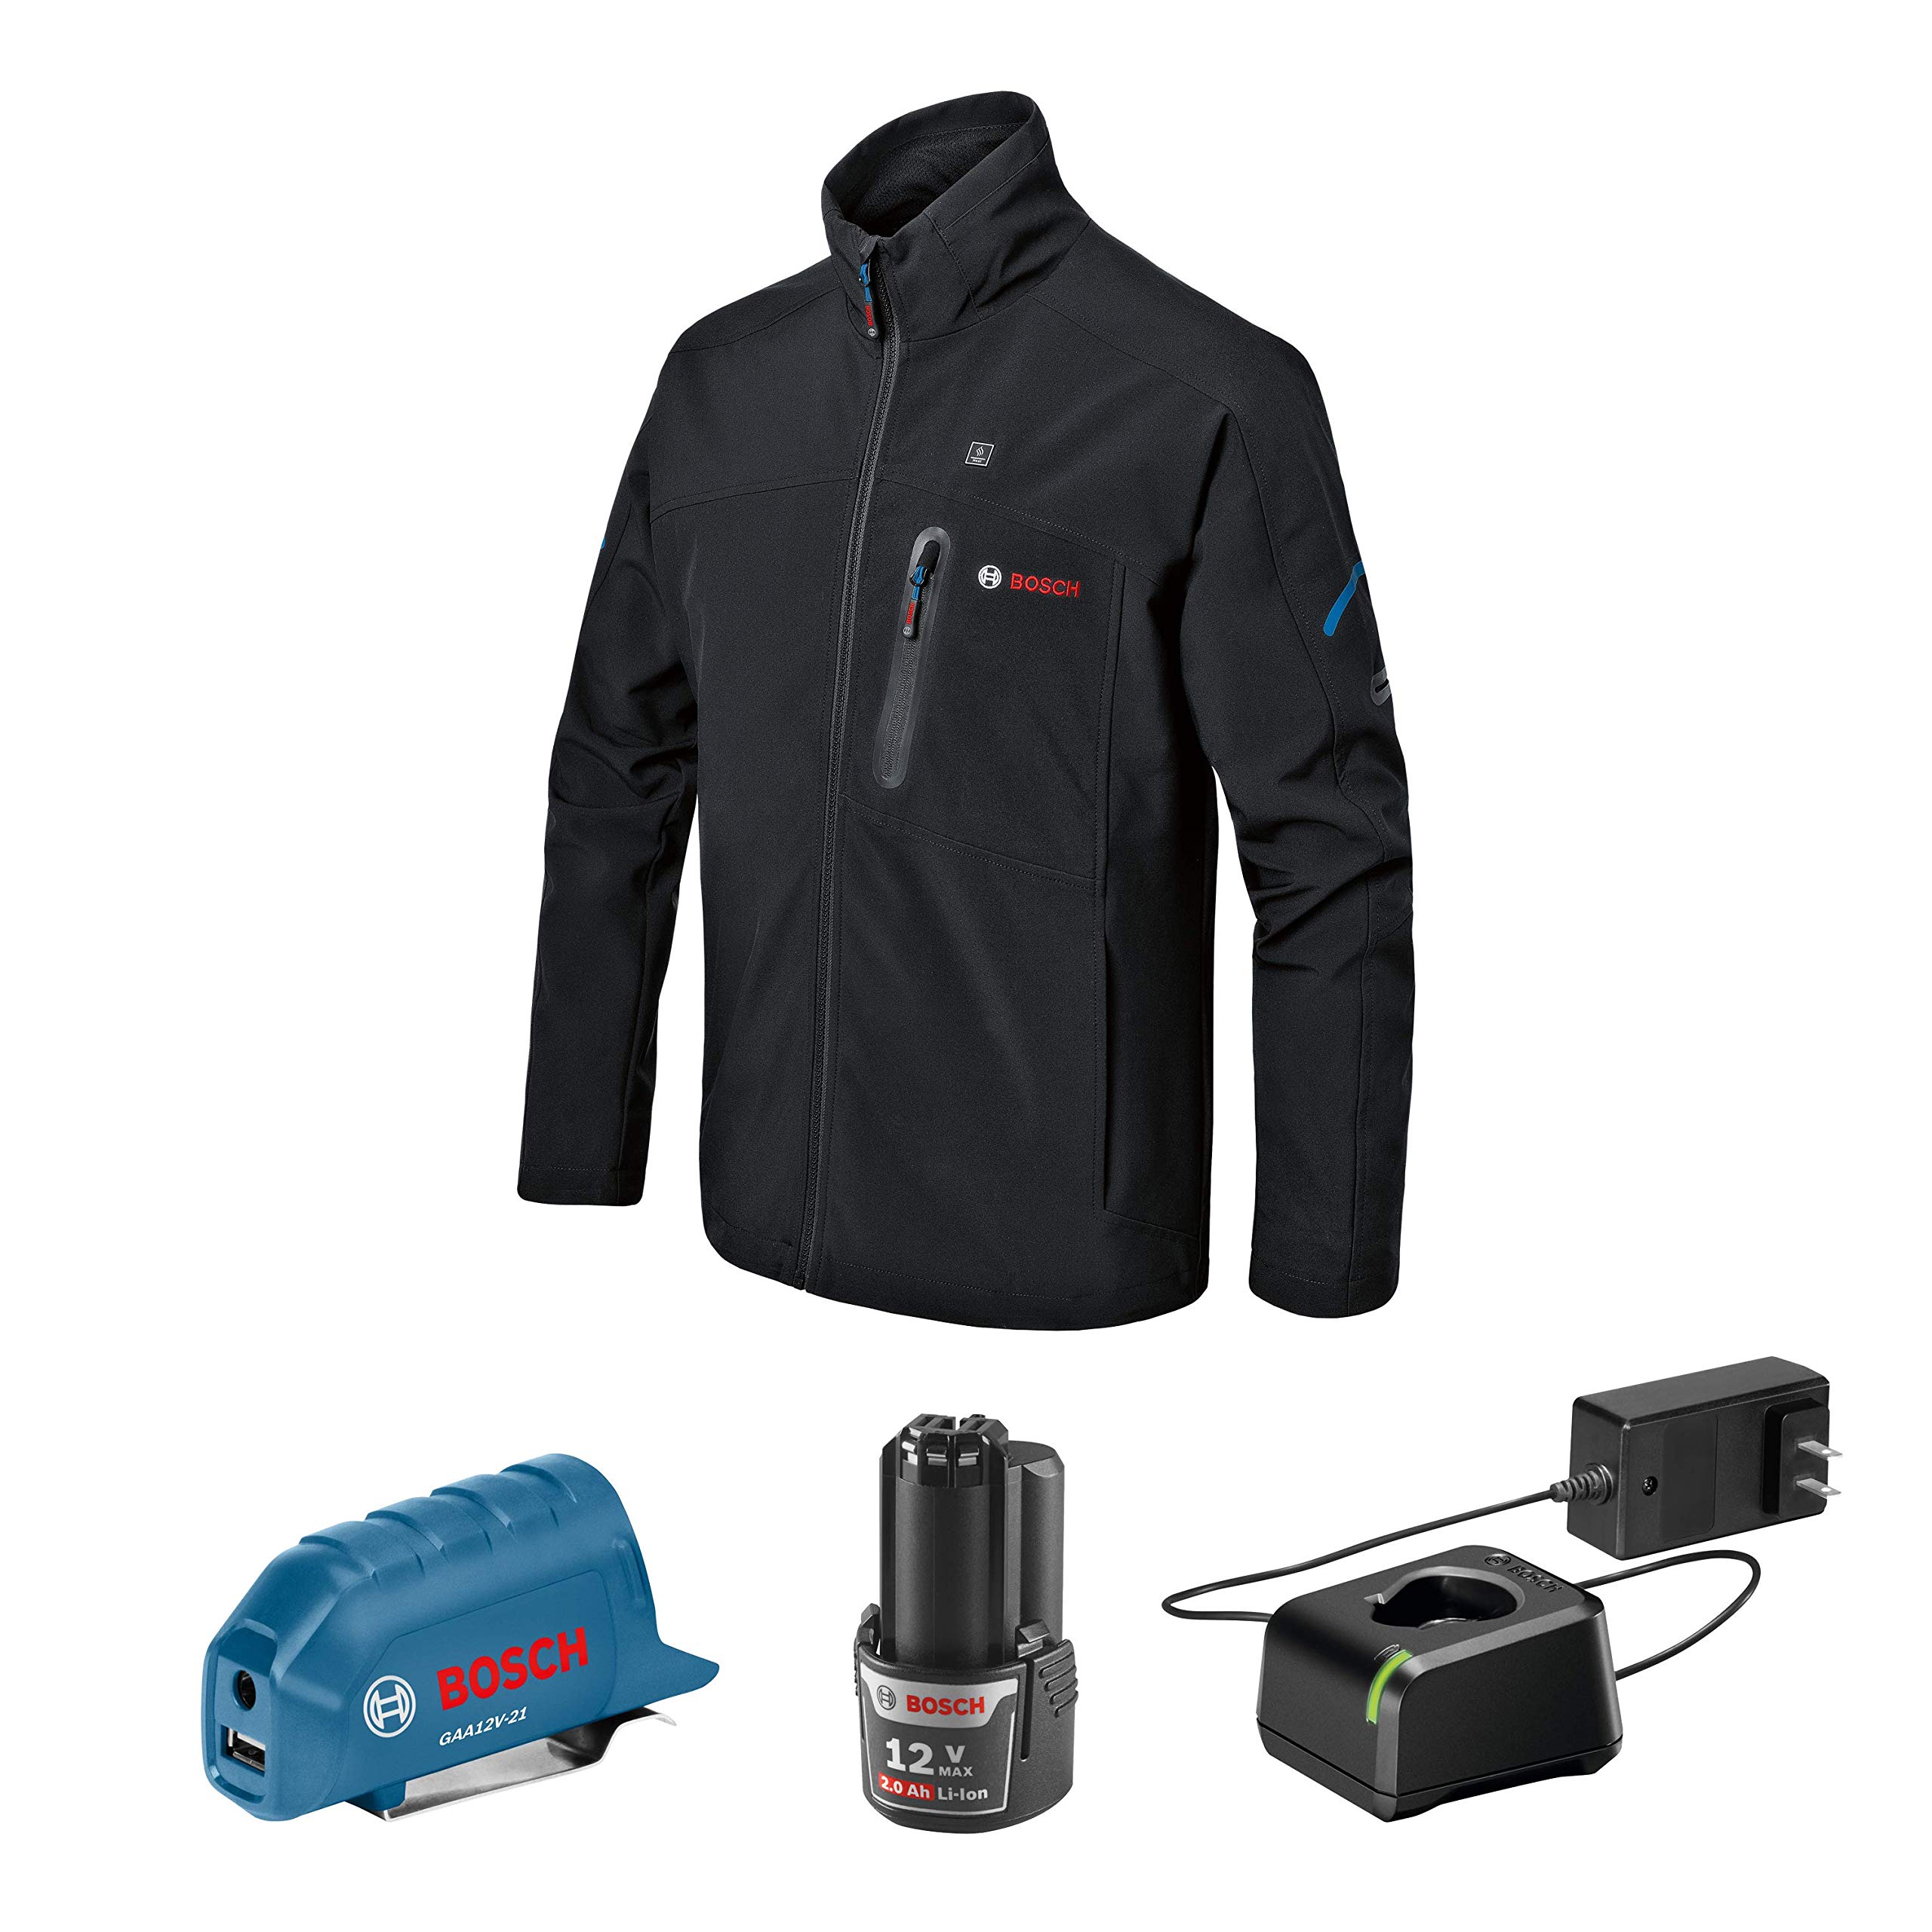 BOSCH GHJ12V-20XXLN12 12V Max Heated Jacket Kit with Portable Power Adapter - Size 2X Large